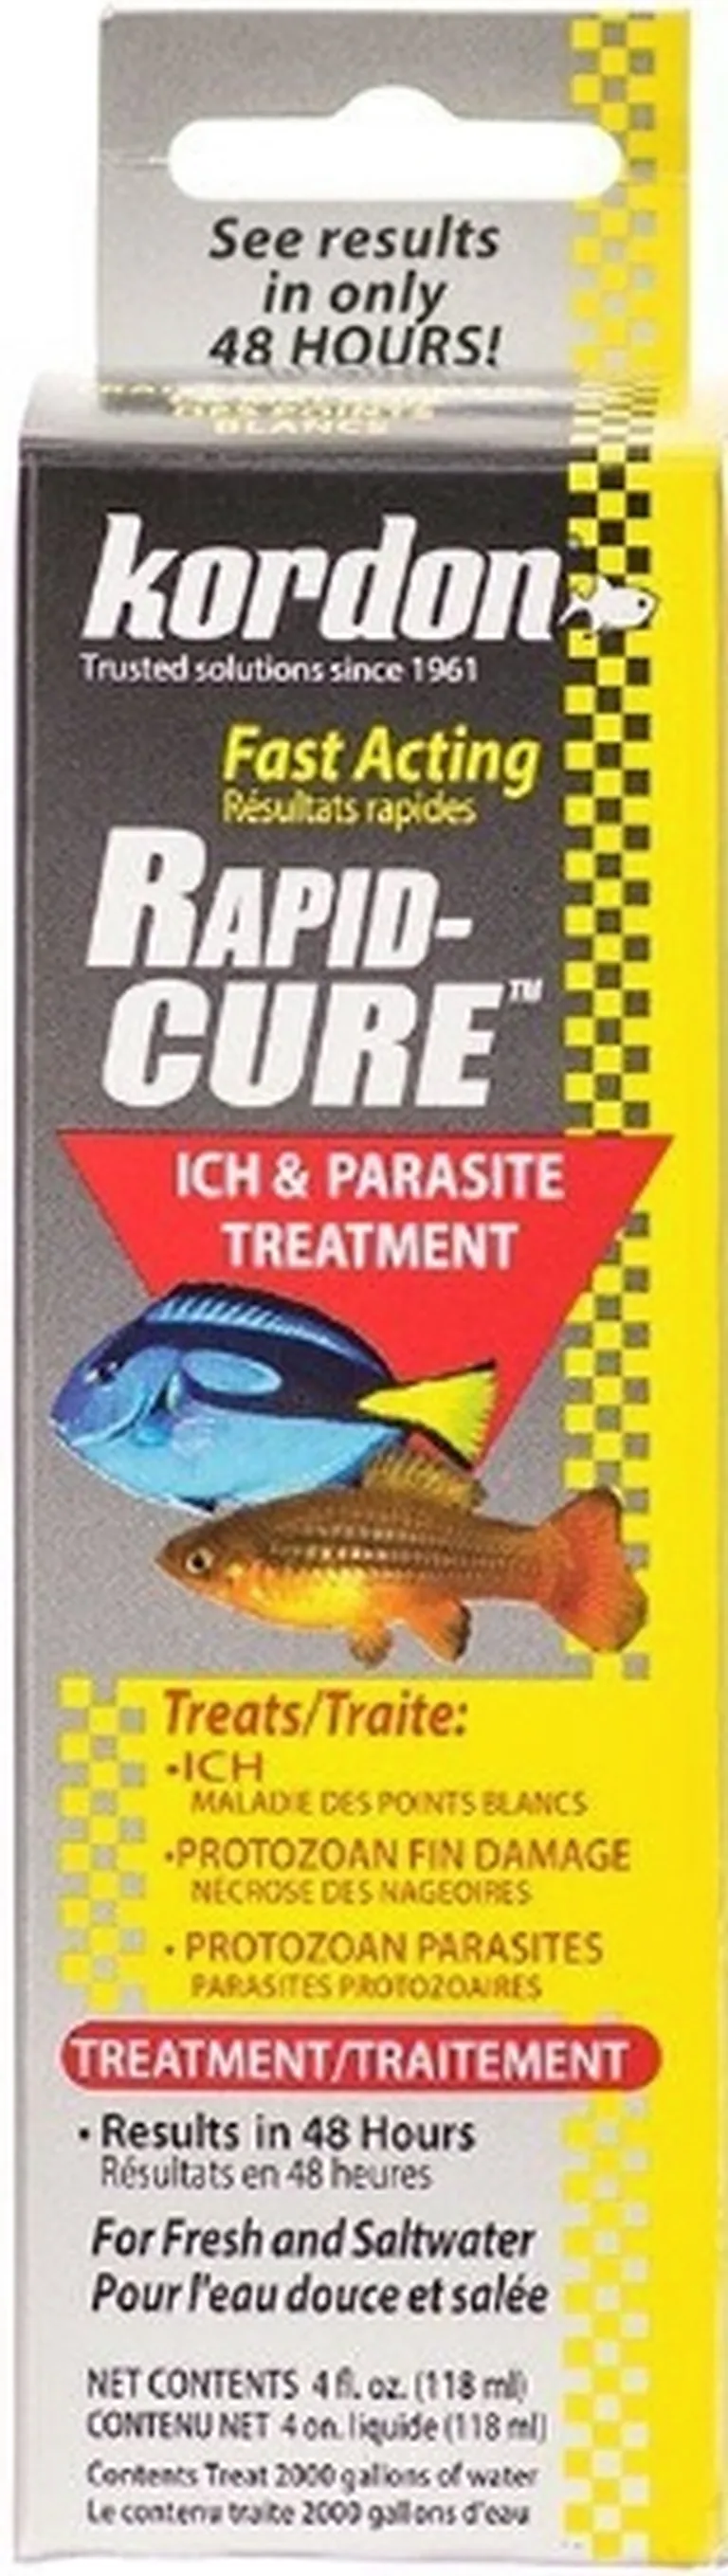 Kordon Rapid Cure Ich and Parasite Treatment Photo 2